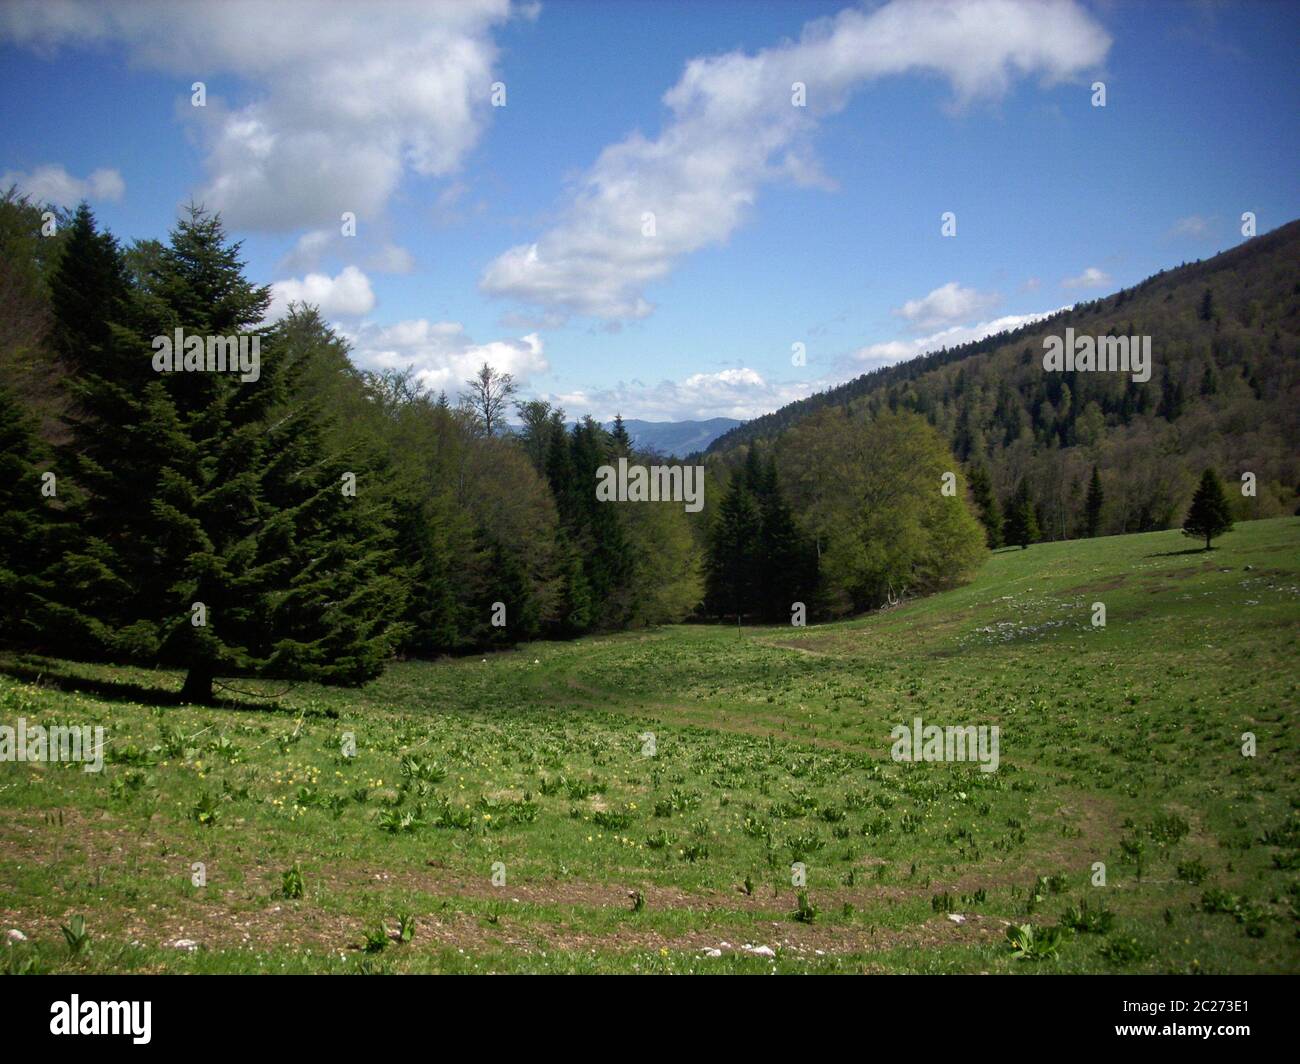 French lower alpine valley near the Col de Rousset, part of the Vercors Regional Natural Park in the Drome valley, France.  Background is blue sky wit Stock Photo